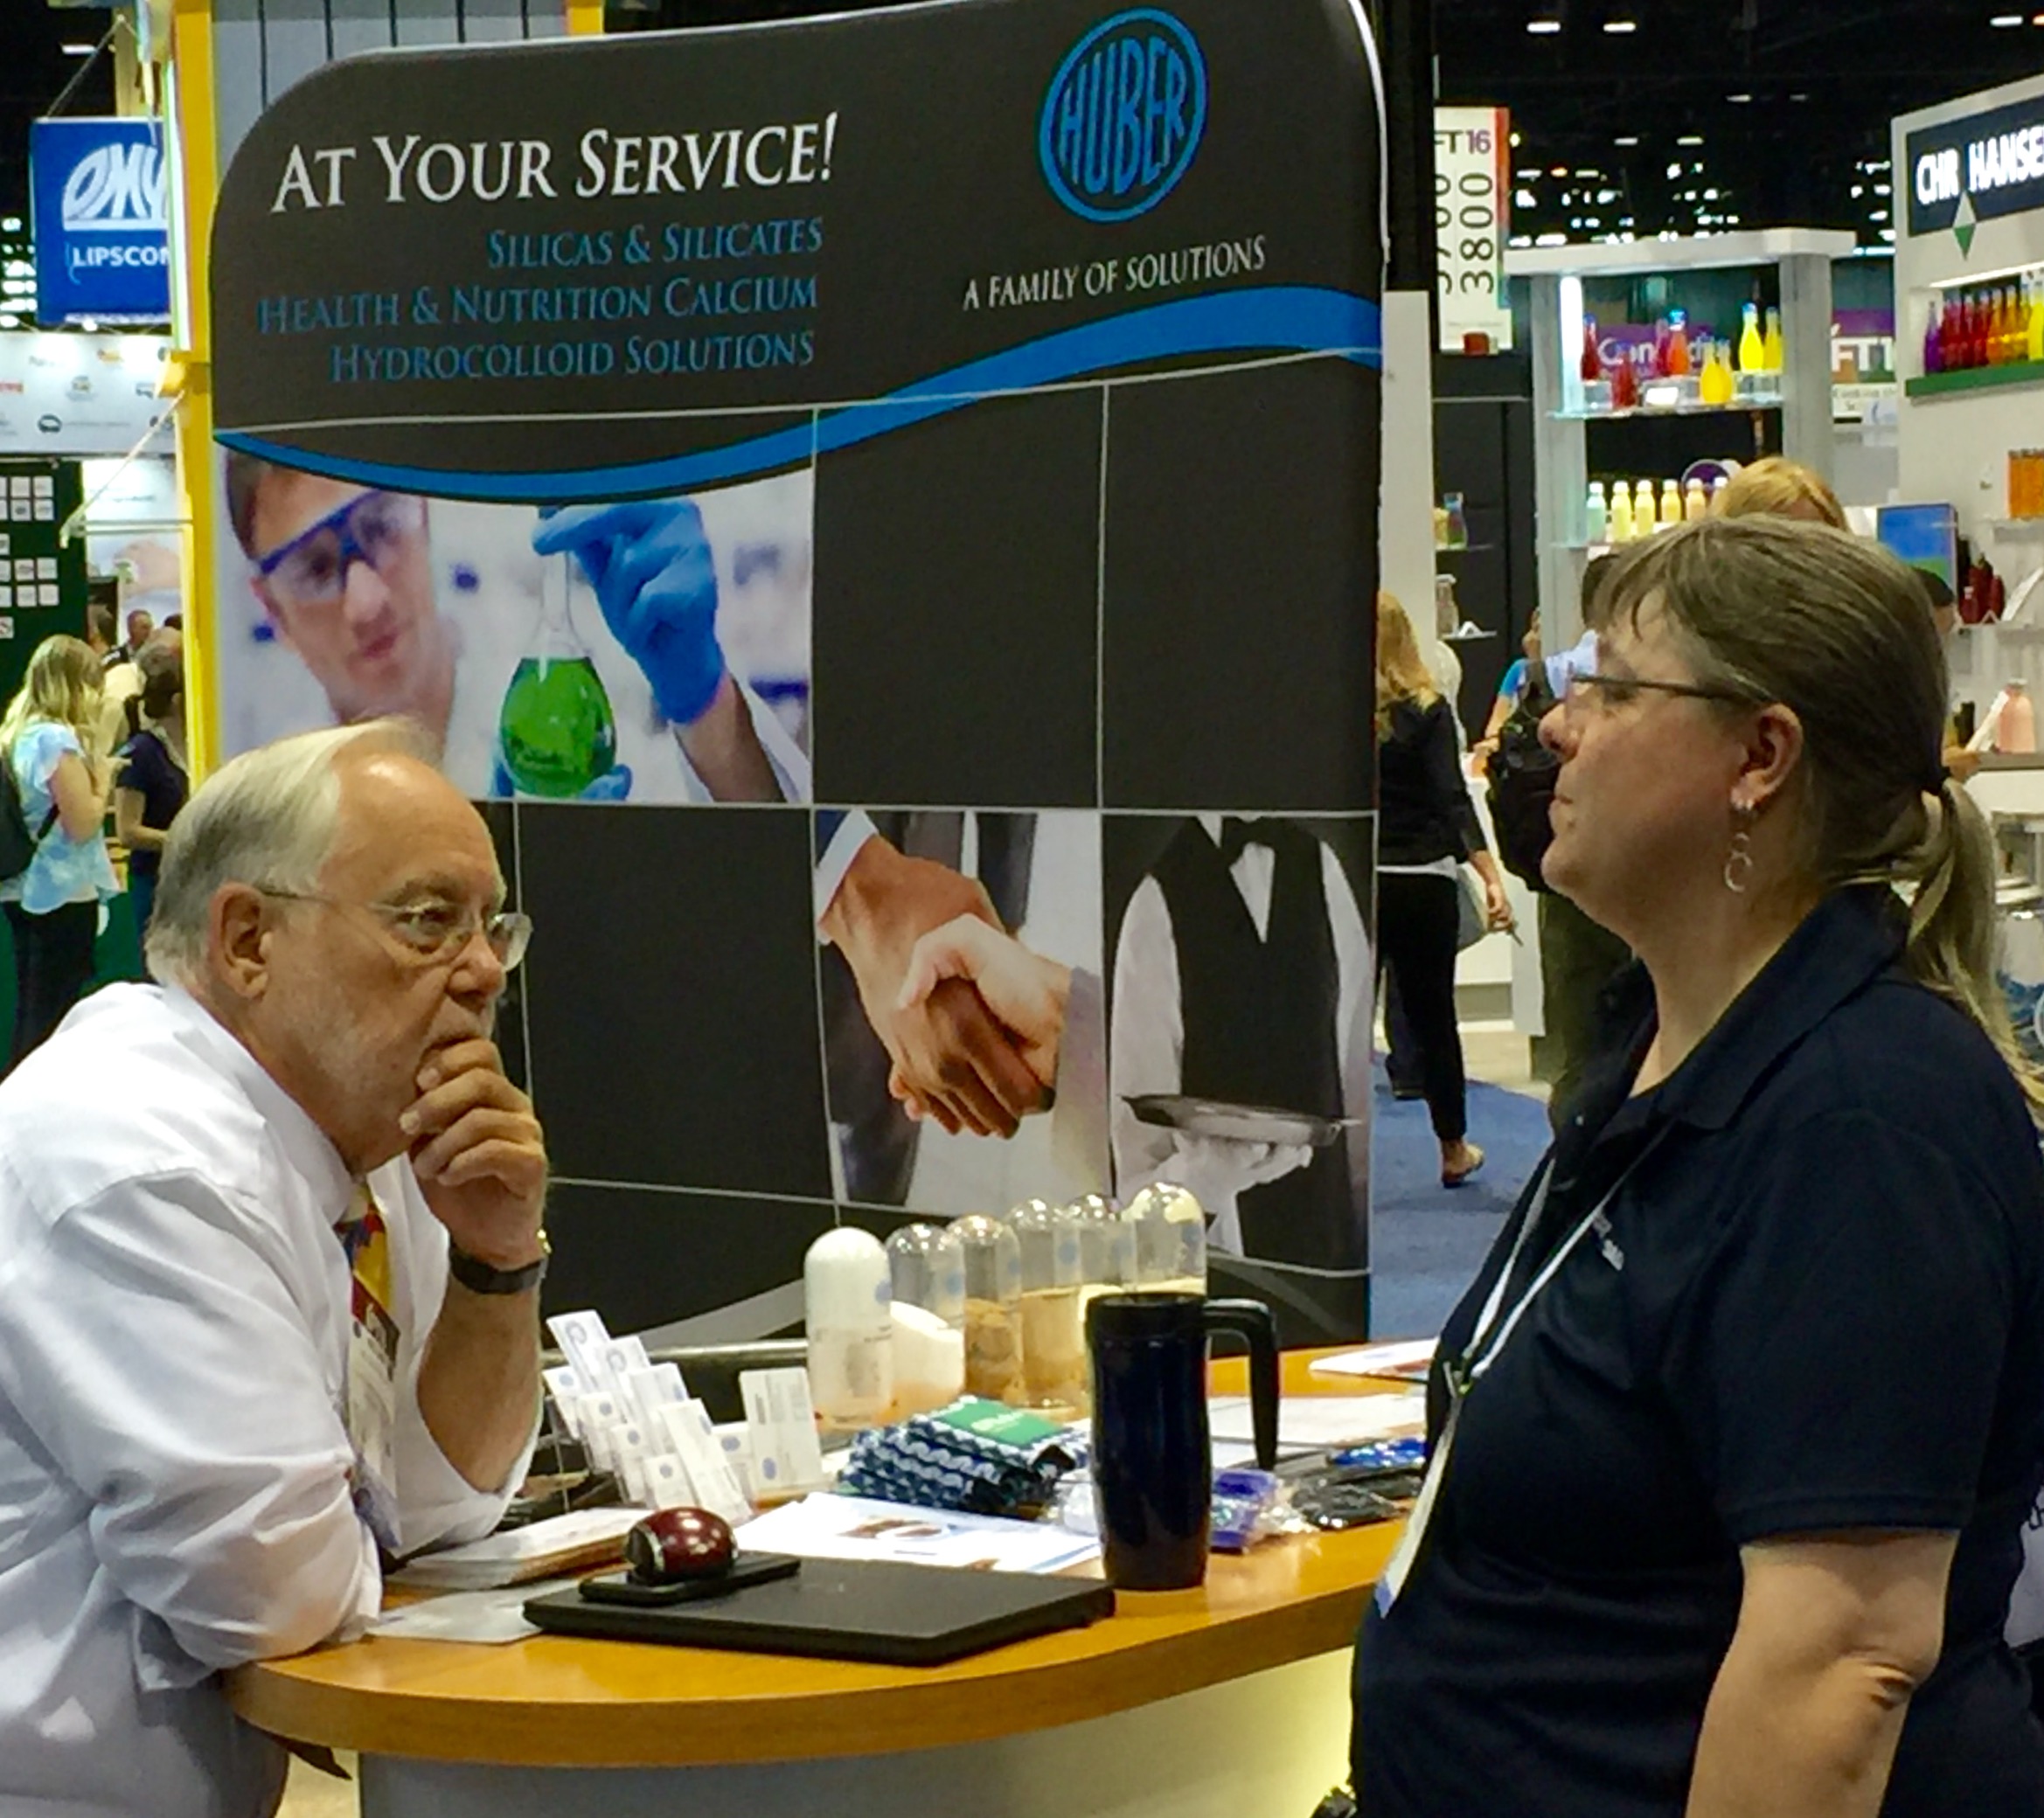 Huber's Sr. Technical Service Representative Nolan Phillps (left) fields questions about Huber's Silicas and Silicates at IFT2016.